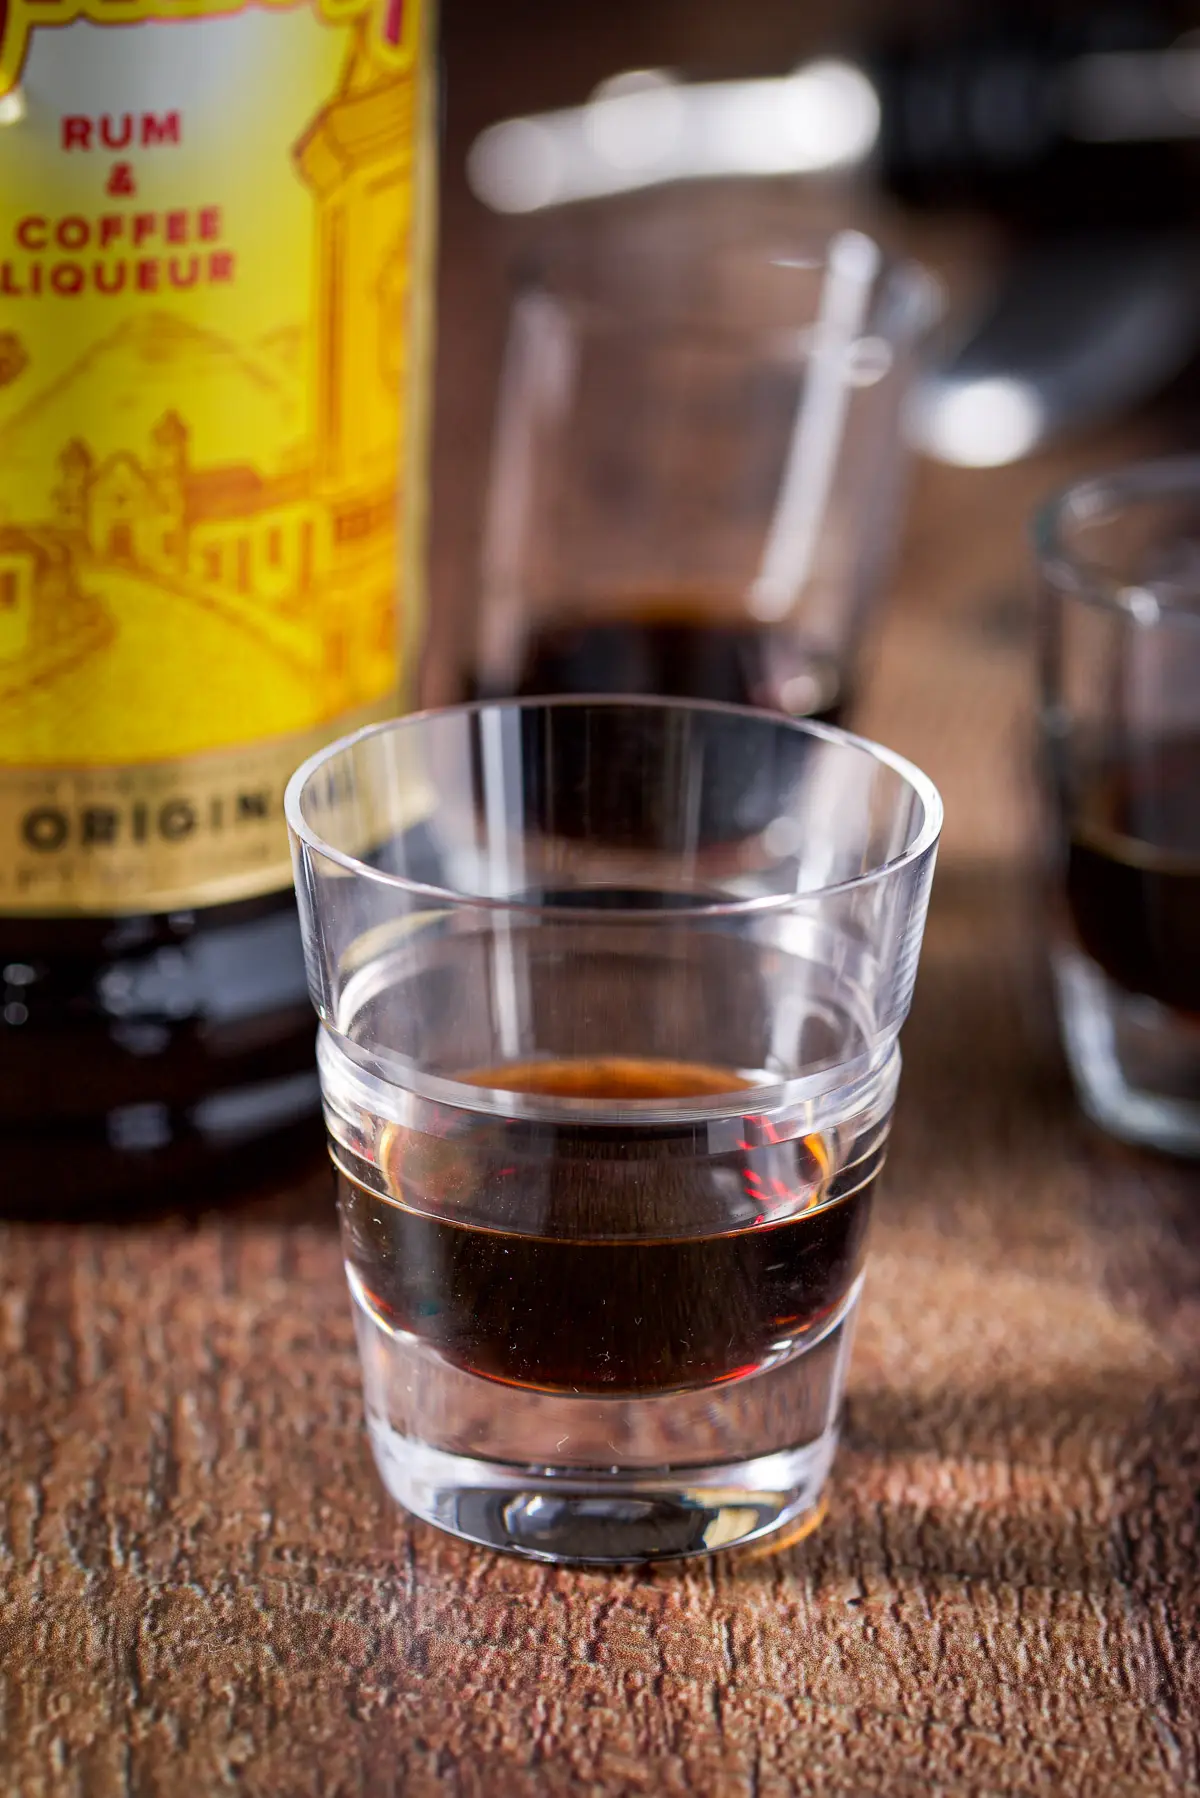 A beveled glass in front with Kahlua in it with the other glasses and bottles in the background